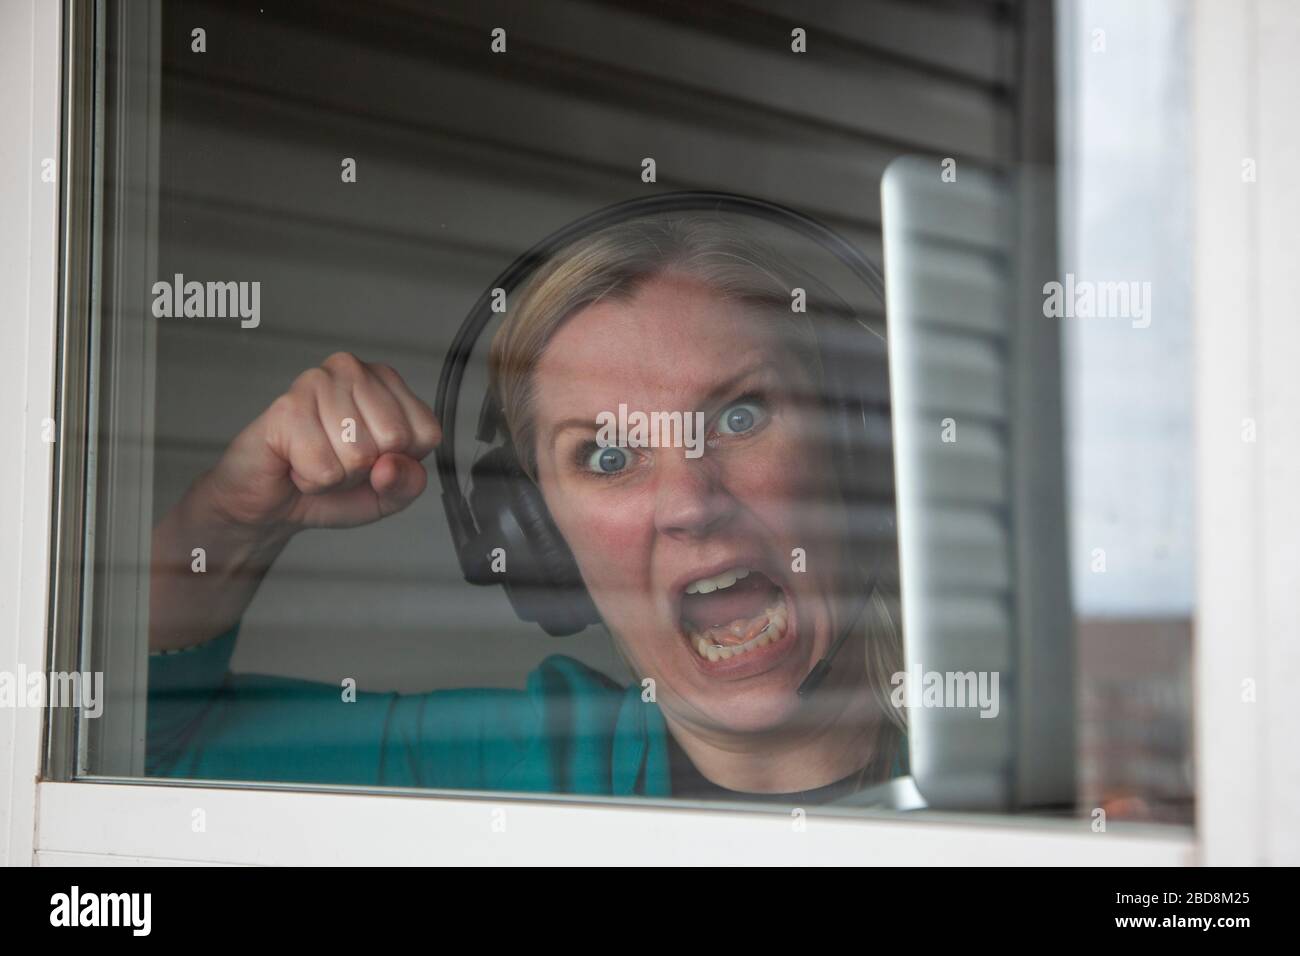 employee working from home looks crazy or mad stuck inside window Stock Photo